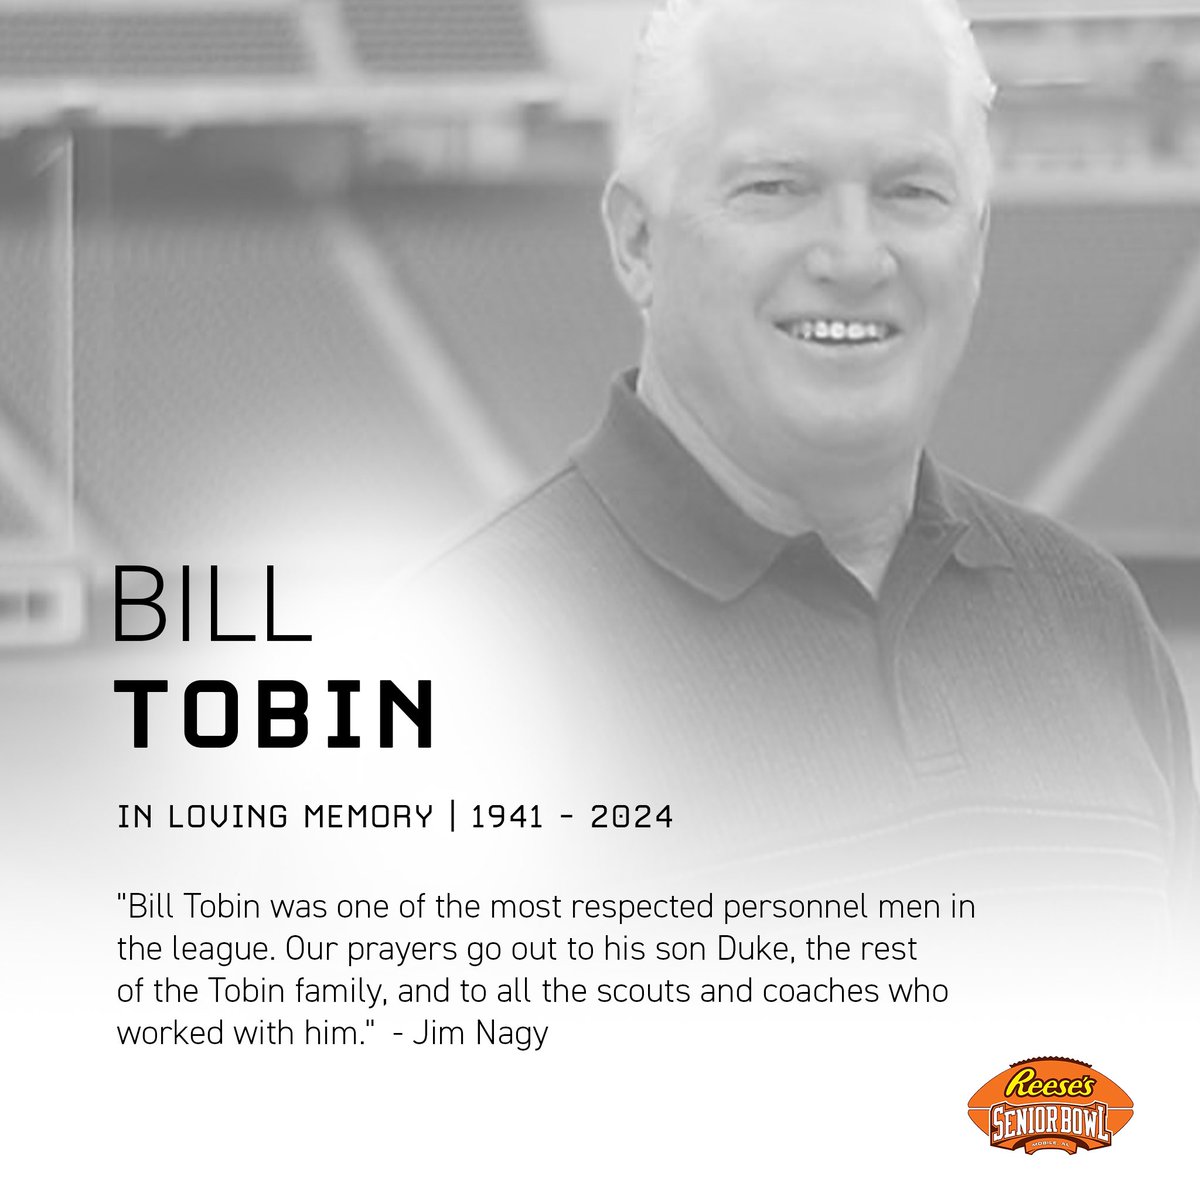 The Senior Bowl is saddened to hear of the passing of long time NFL personnel and executive Bill Tobin. A legend in the front office and scouting community. Rest in Peace.